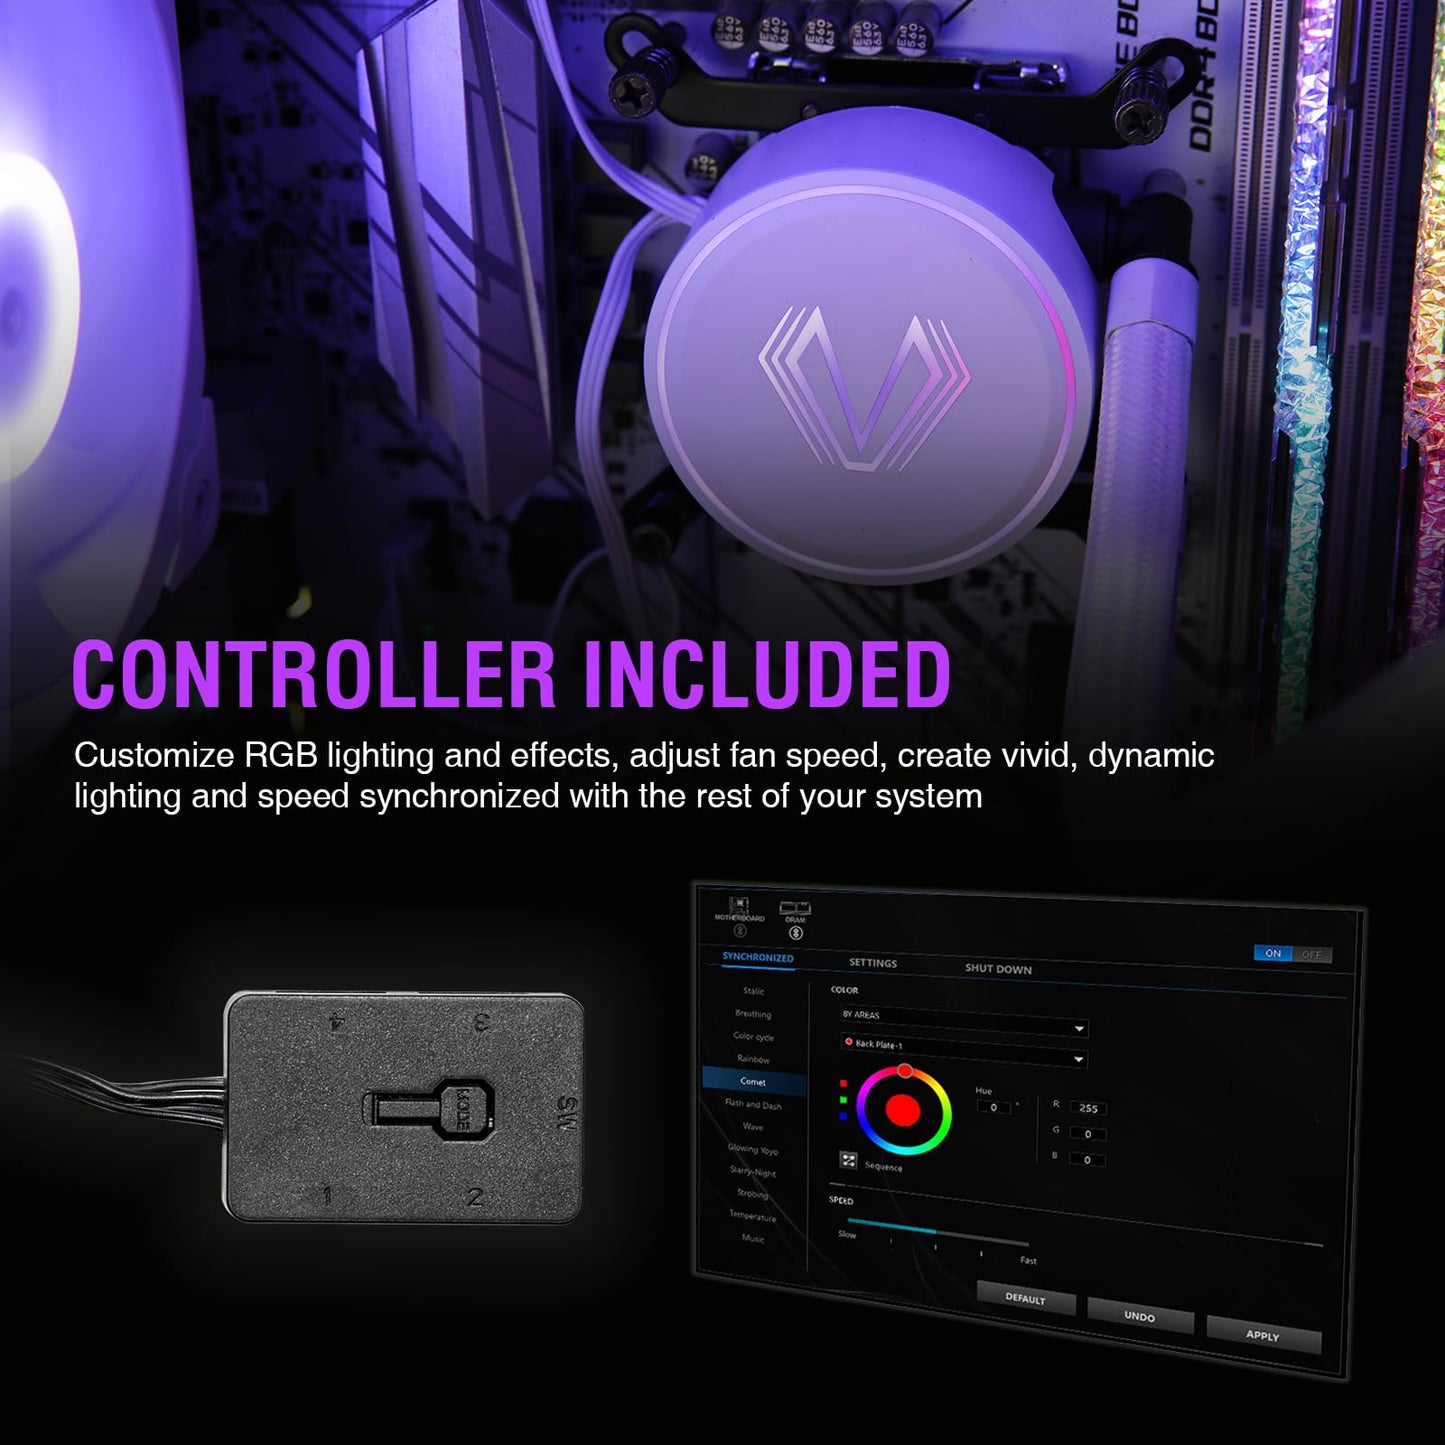 Vetroo V240 White Liquid CPU Cooler 240mm Addressable RGB & PWM Pump & Fans 250W TDP AIO Water Cooler w/Controller Hub for Intel LGA 1700/1200/115X AMD AM5/AM4 for Gaming Console